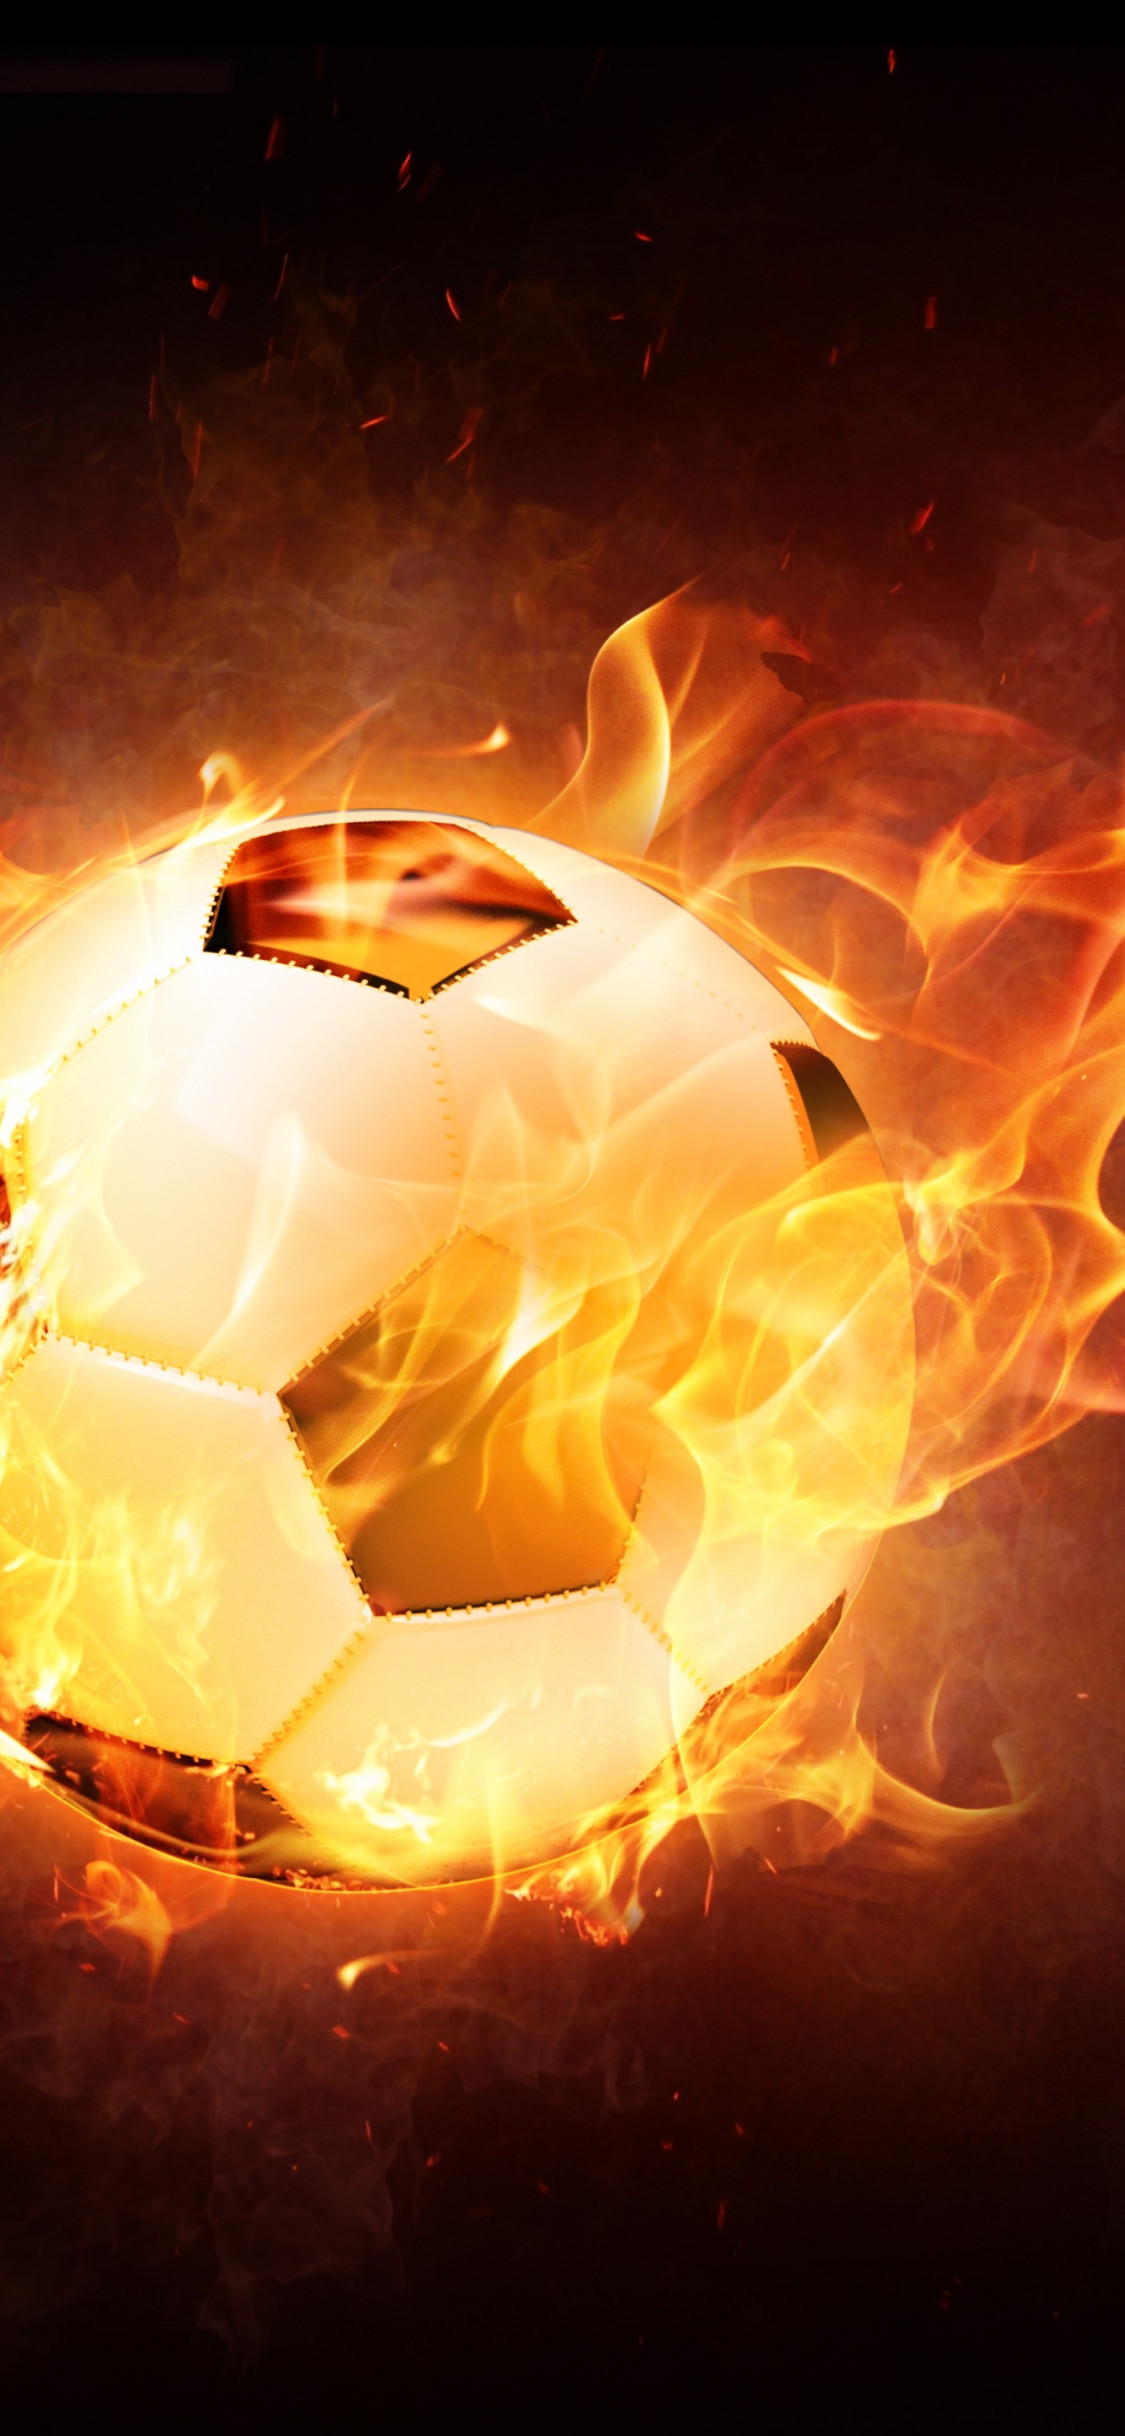 The football ball is on fire wallpaper 1125x2436